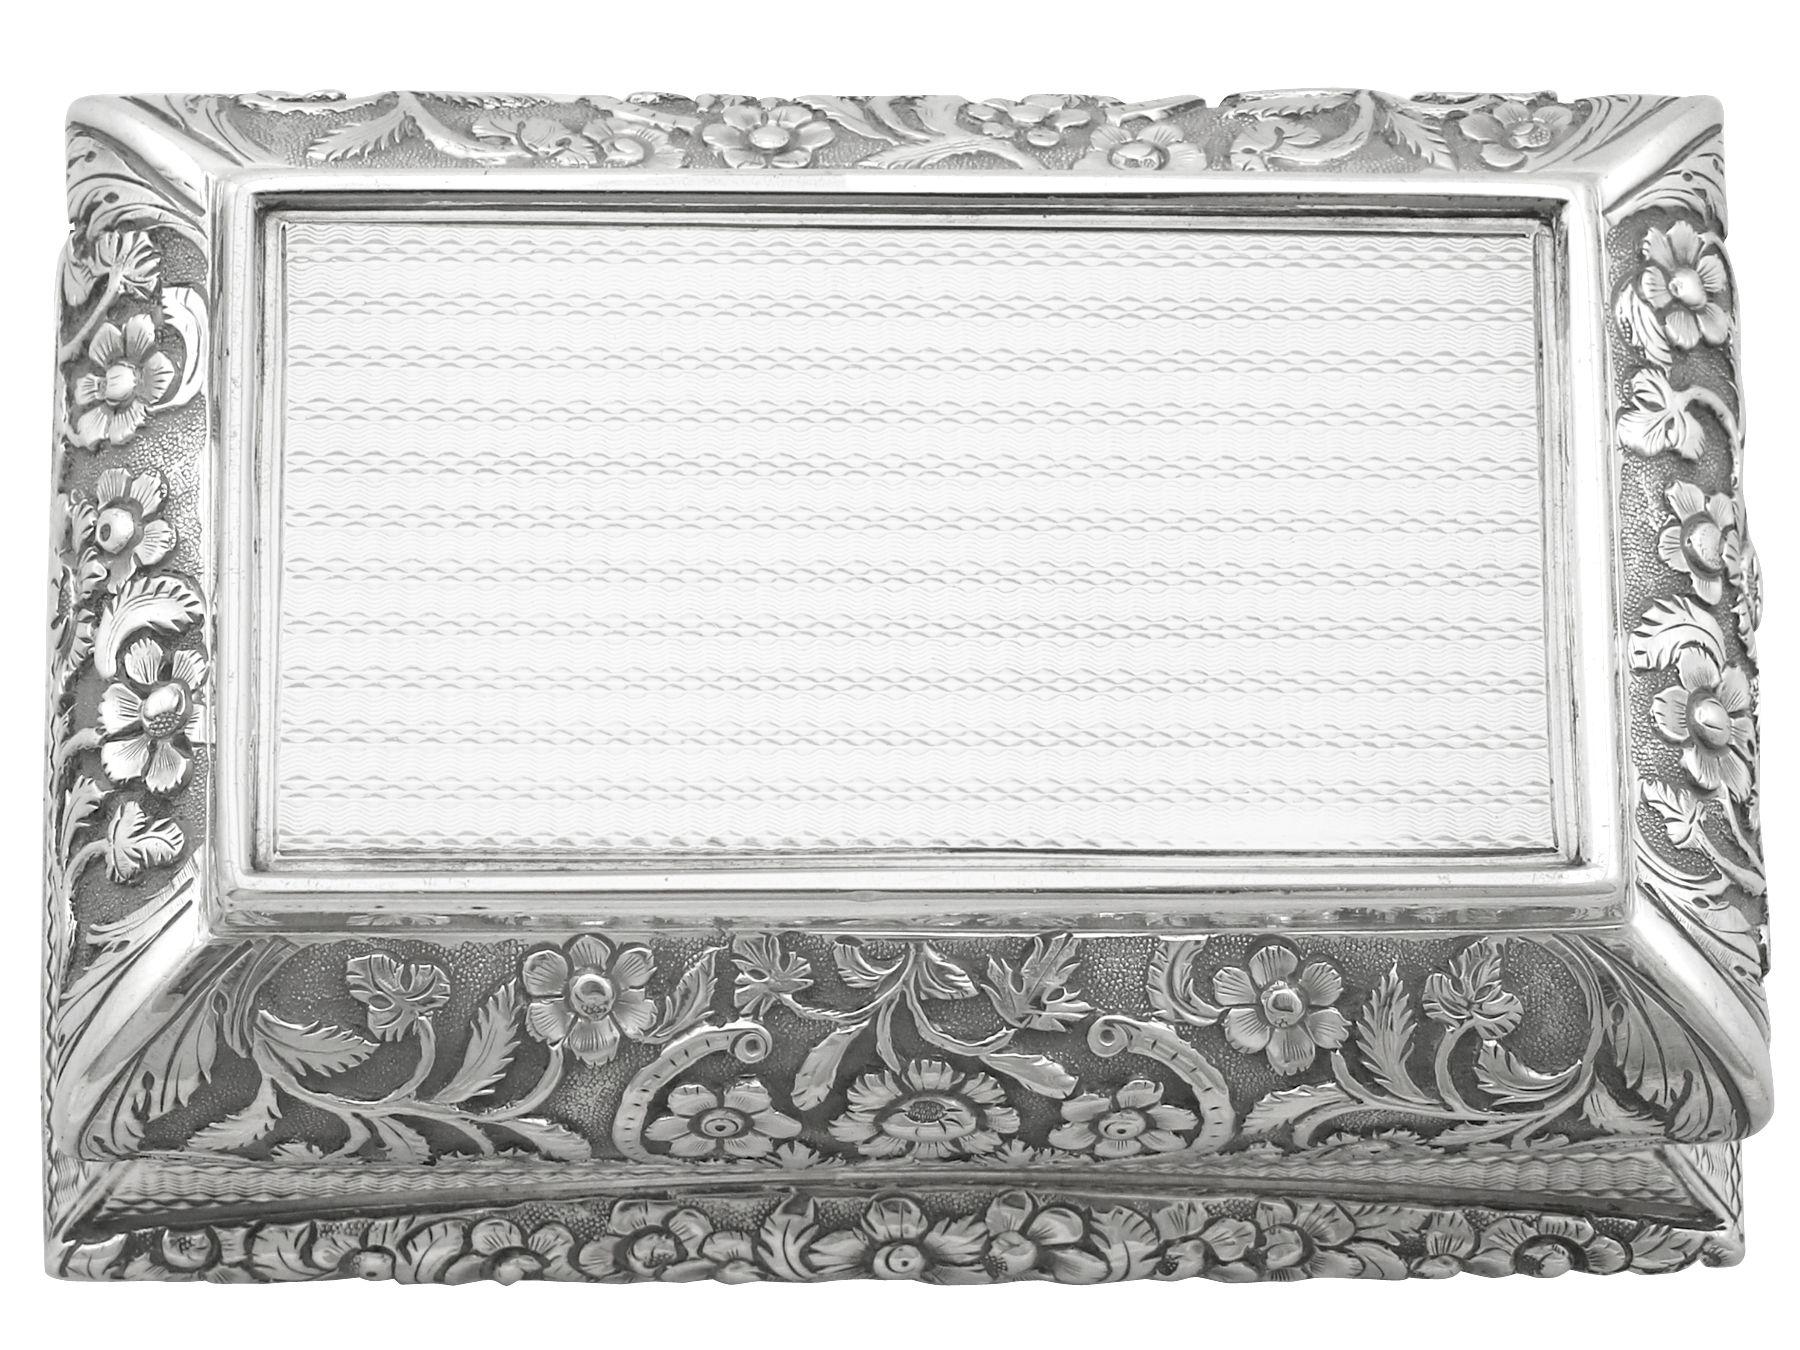 An exceptional, fine and impressive antique William IV English sterling silver table snuff box; an addition to our collectable silverware collection. 

This exceptional antique William IV sterling silver snuff box has a rectangular, rounded